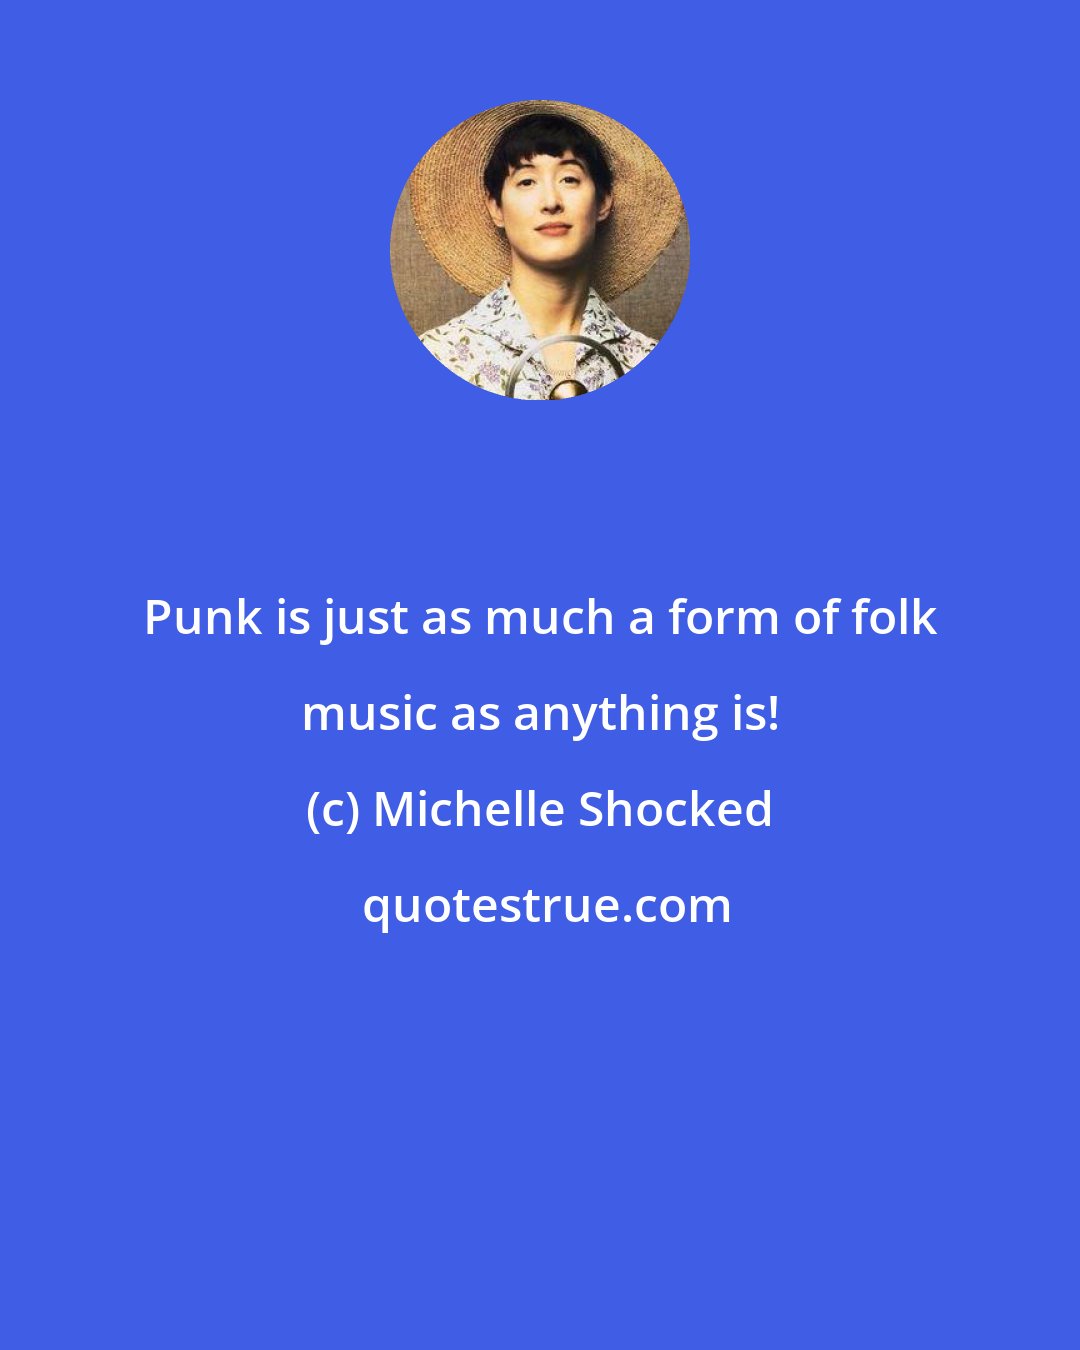 Michelle Shocked: Punk is just as much a form of folk music as anything is!